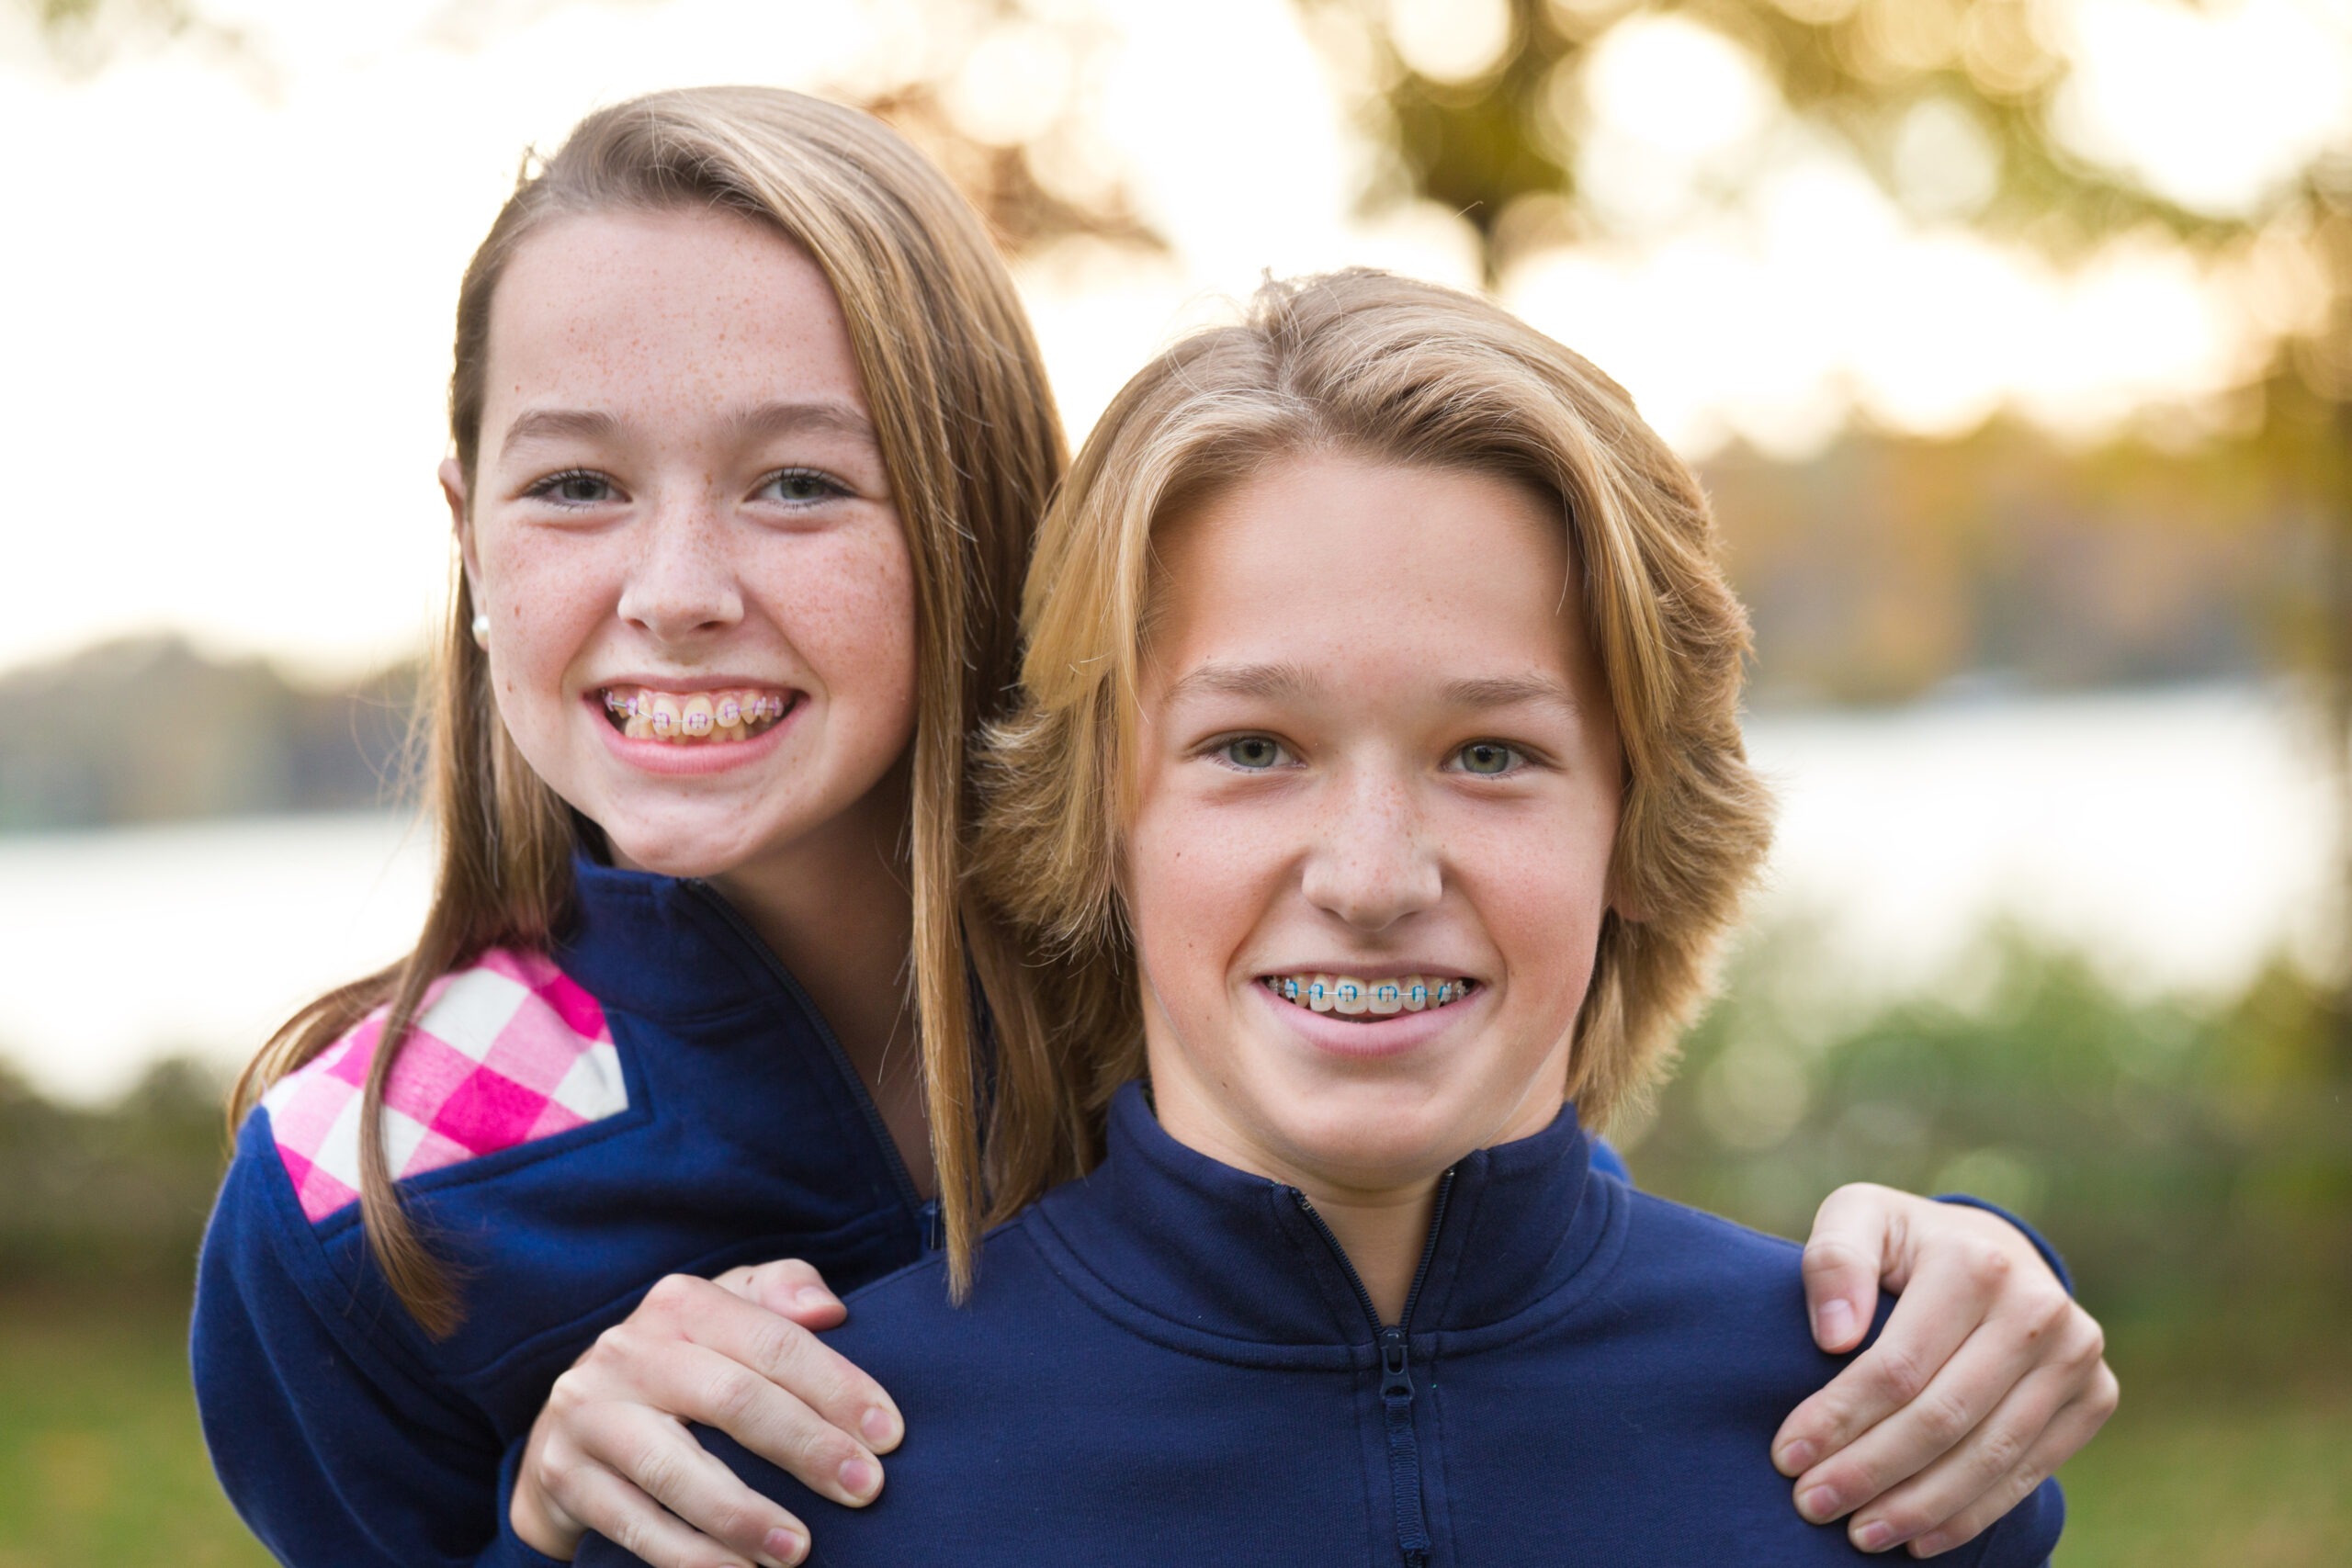 You've probably asked, "When's the best age to get braces?" Well, today at Innovative Orthodontics, we're sharing that information with you!